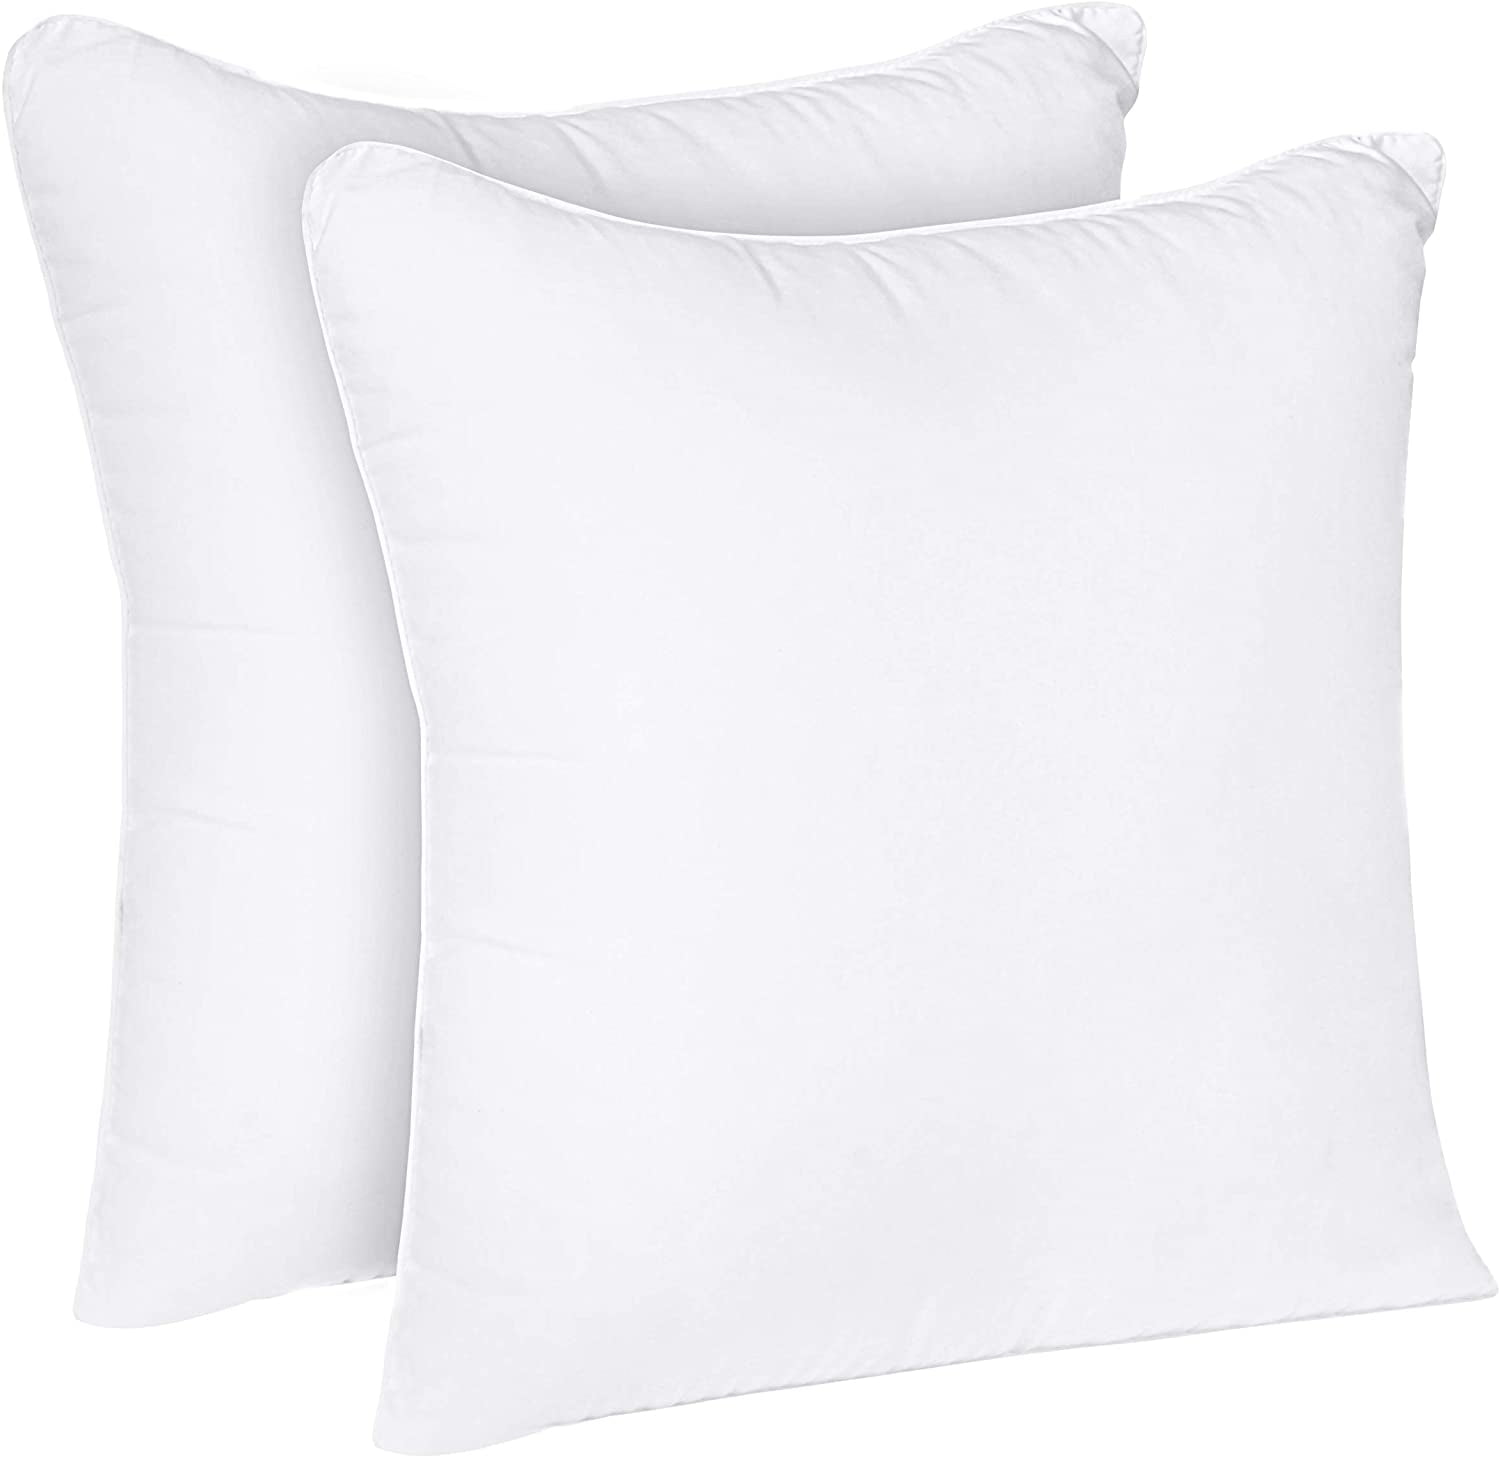 FAPO Throw Pillow Inserts (2-Pack, White), 18x18 Square Interior Sofa Throw  Pillow Inserts with 100% Cotton Cover, Soft Pillow Luxury Microfiber Fill  for Bed and Couch - Indoor Decorative Pillows